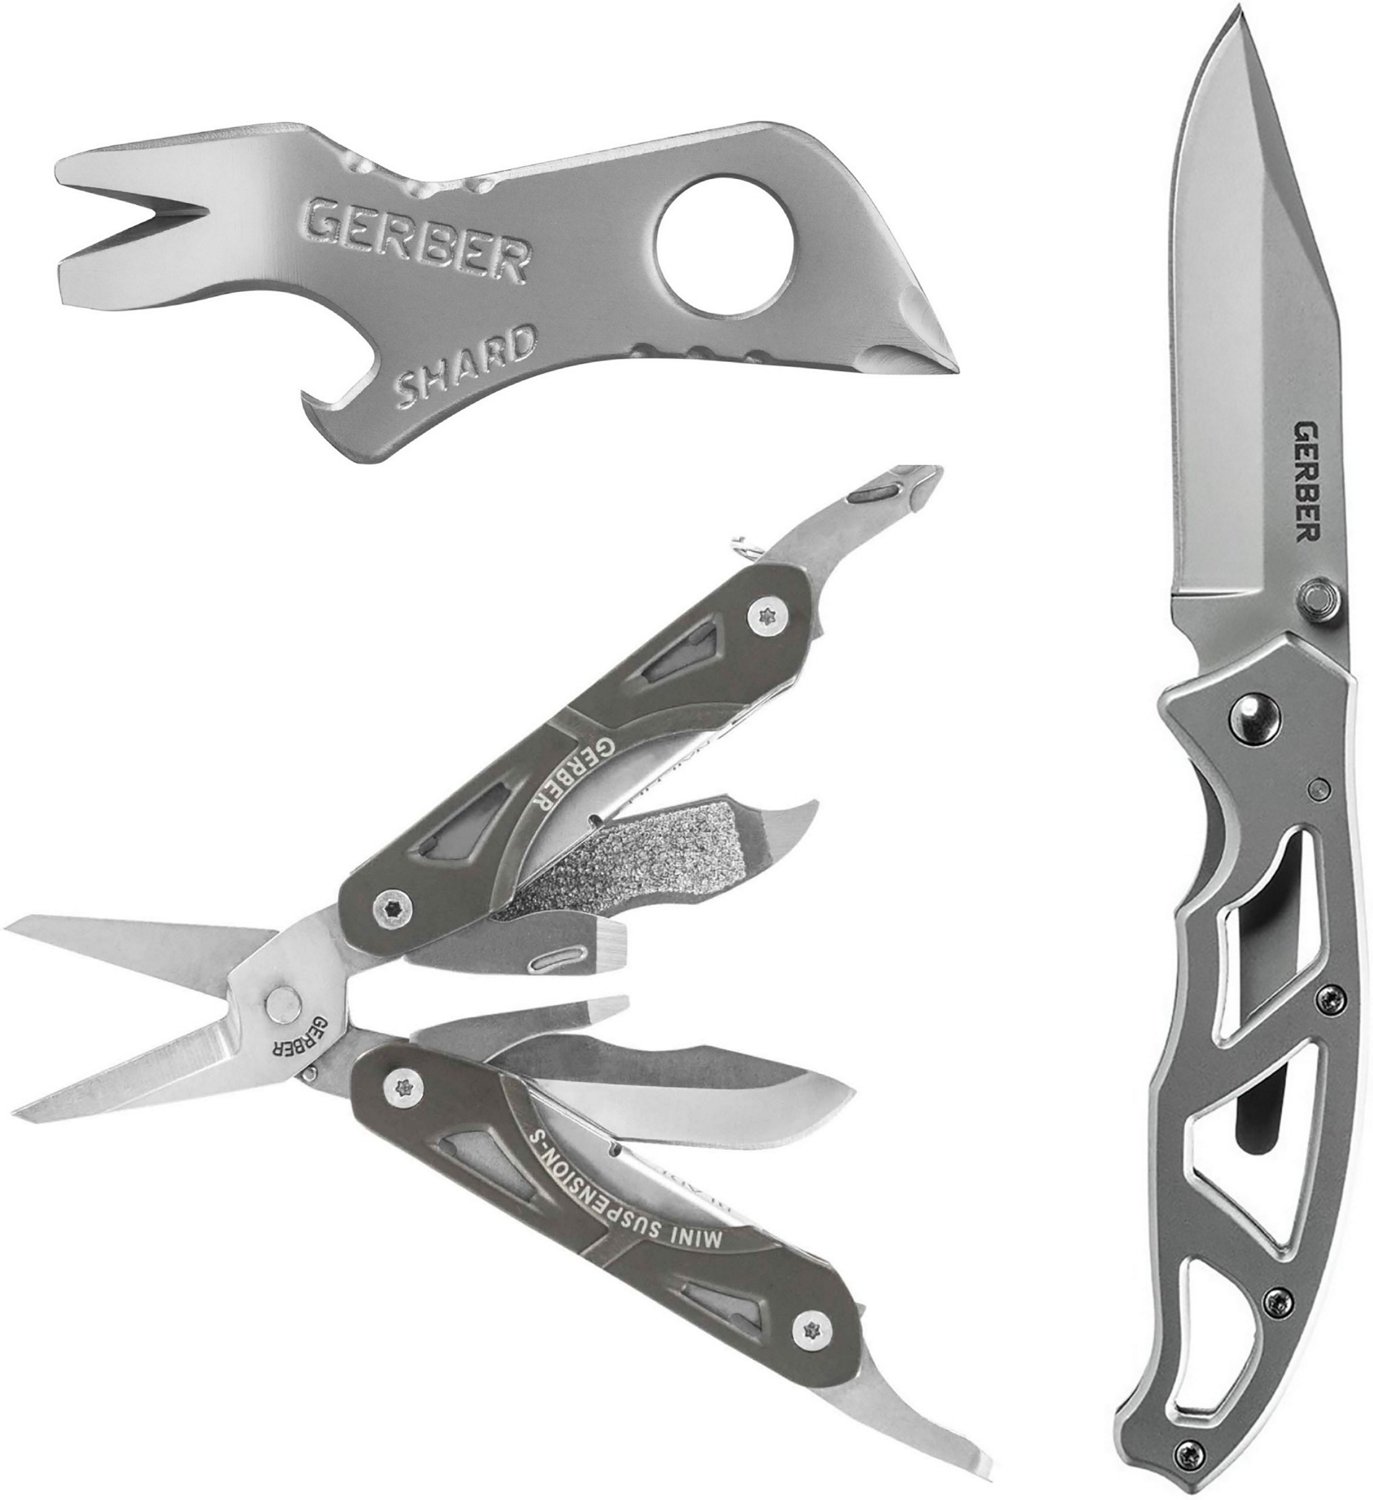 Gerber Paraframe And Multitool Combo Pack Academy